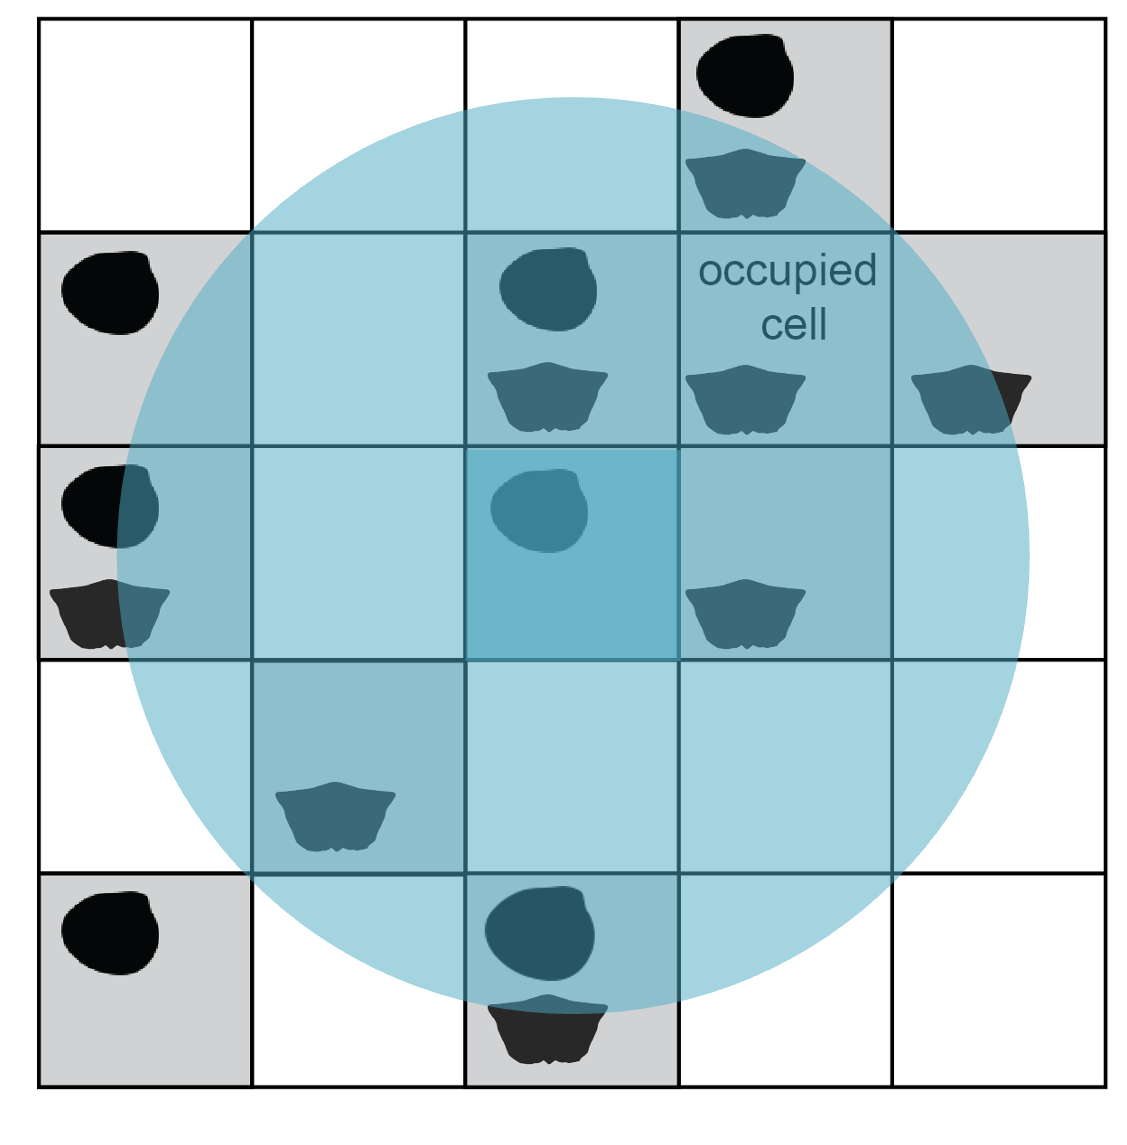 A circle is overlaid on the grid, centered on the middle grid cell highlighted in the previous step. The circle covers some nearby grid cells completely and some farther cells partially.